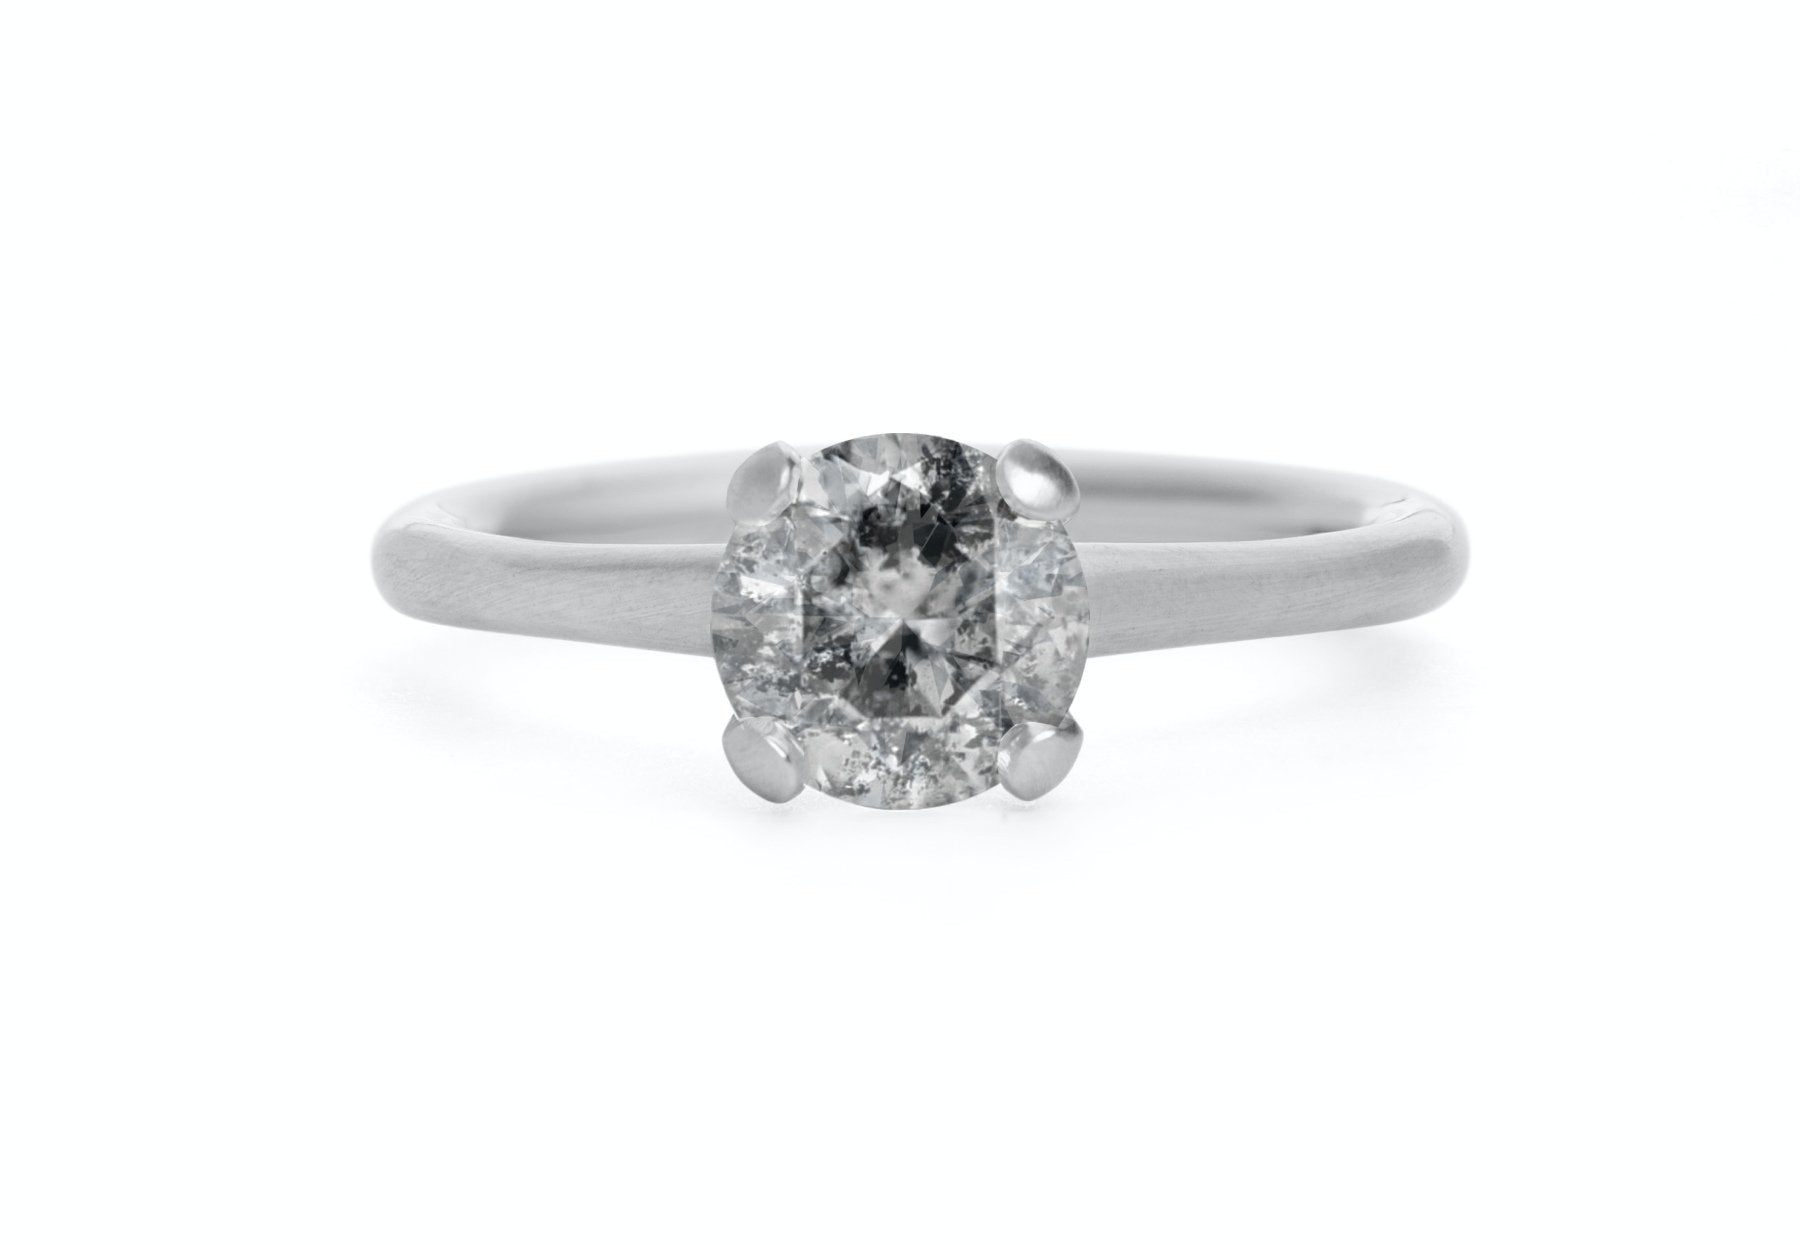 Sculpted platinum 4-claw grey diamond engagement ring